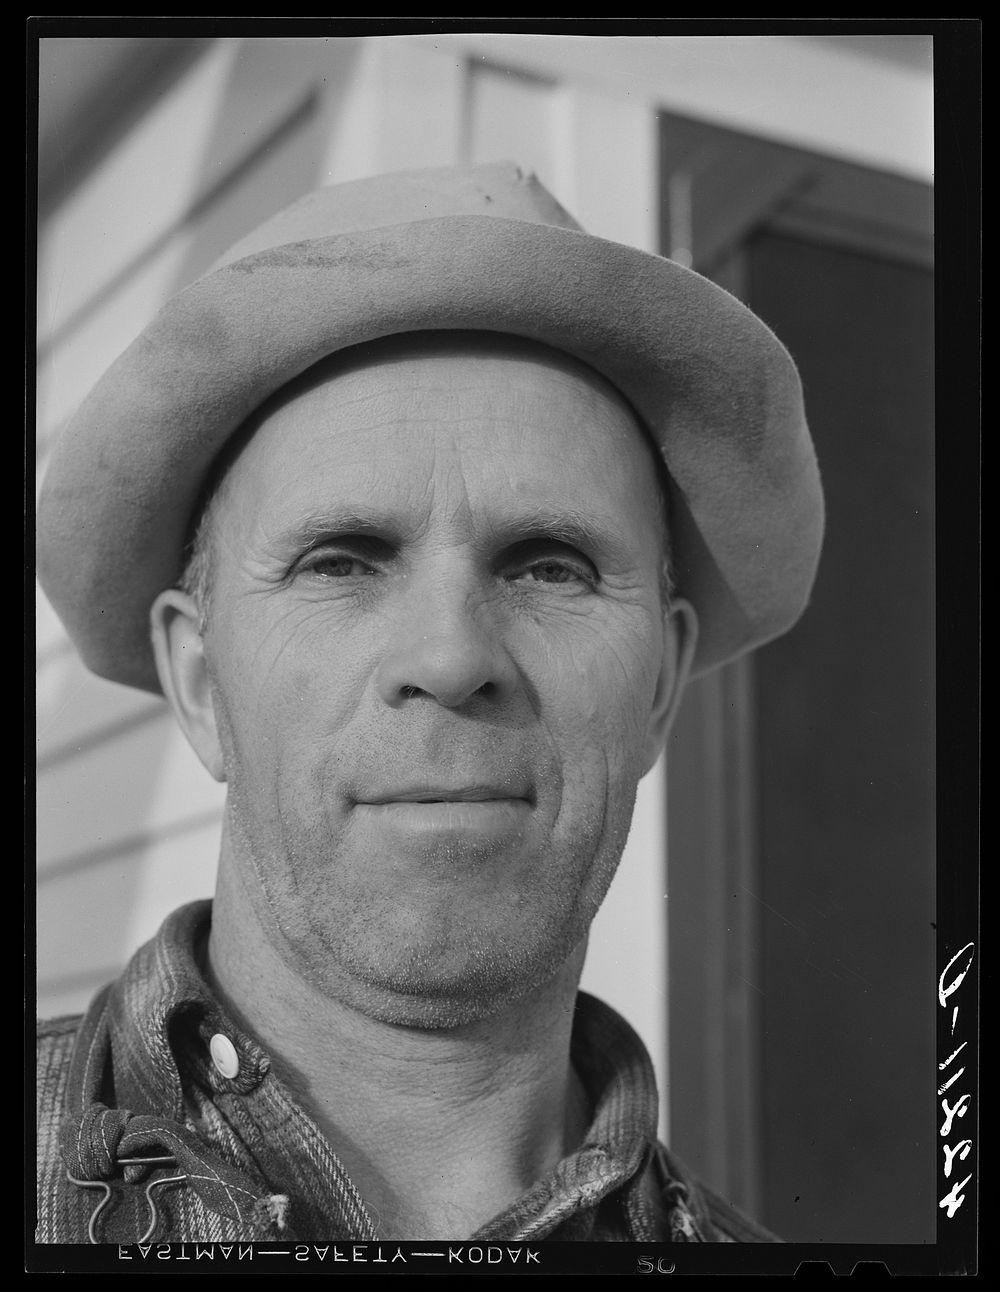 Mr. Karrlo Maki, Finnish poultry farmer in Brooklyn, Connecticut. Sourced from the Library of Congress.